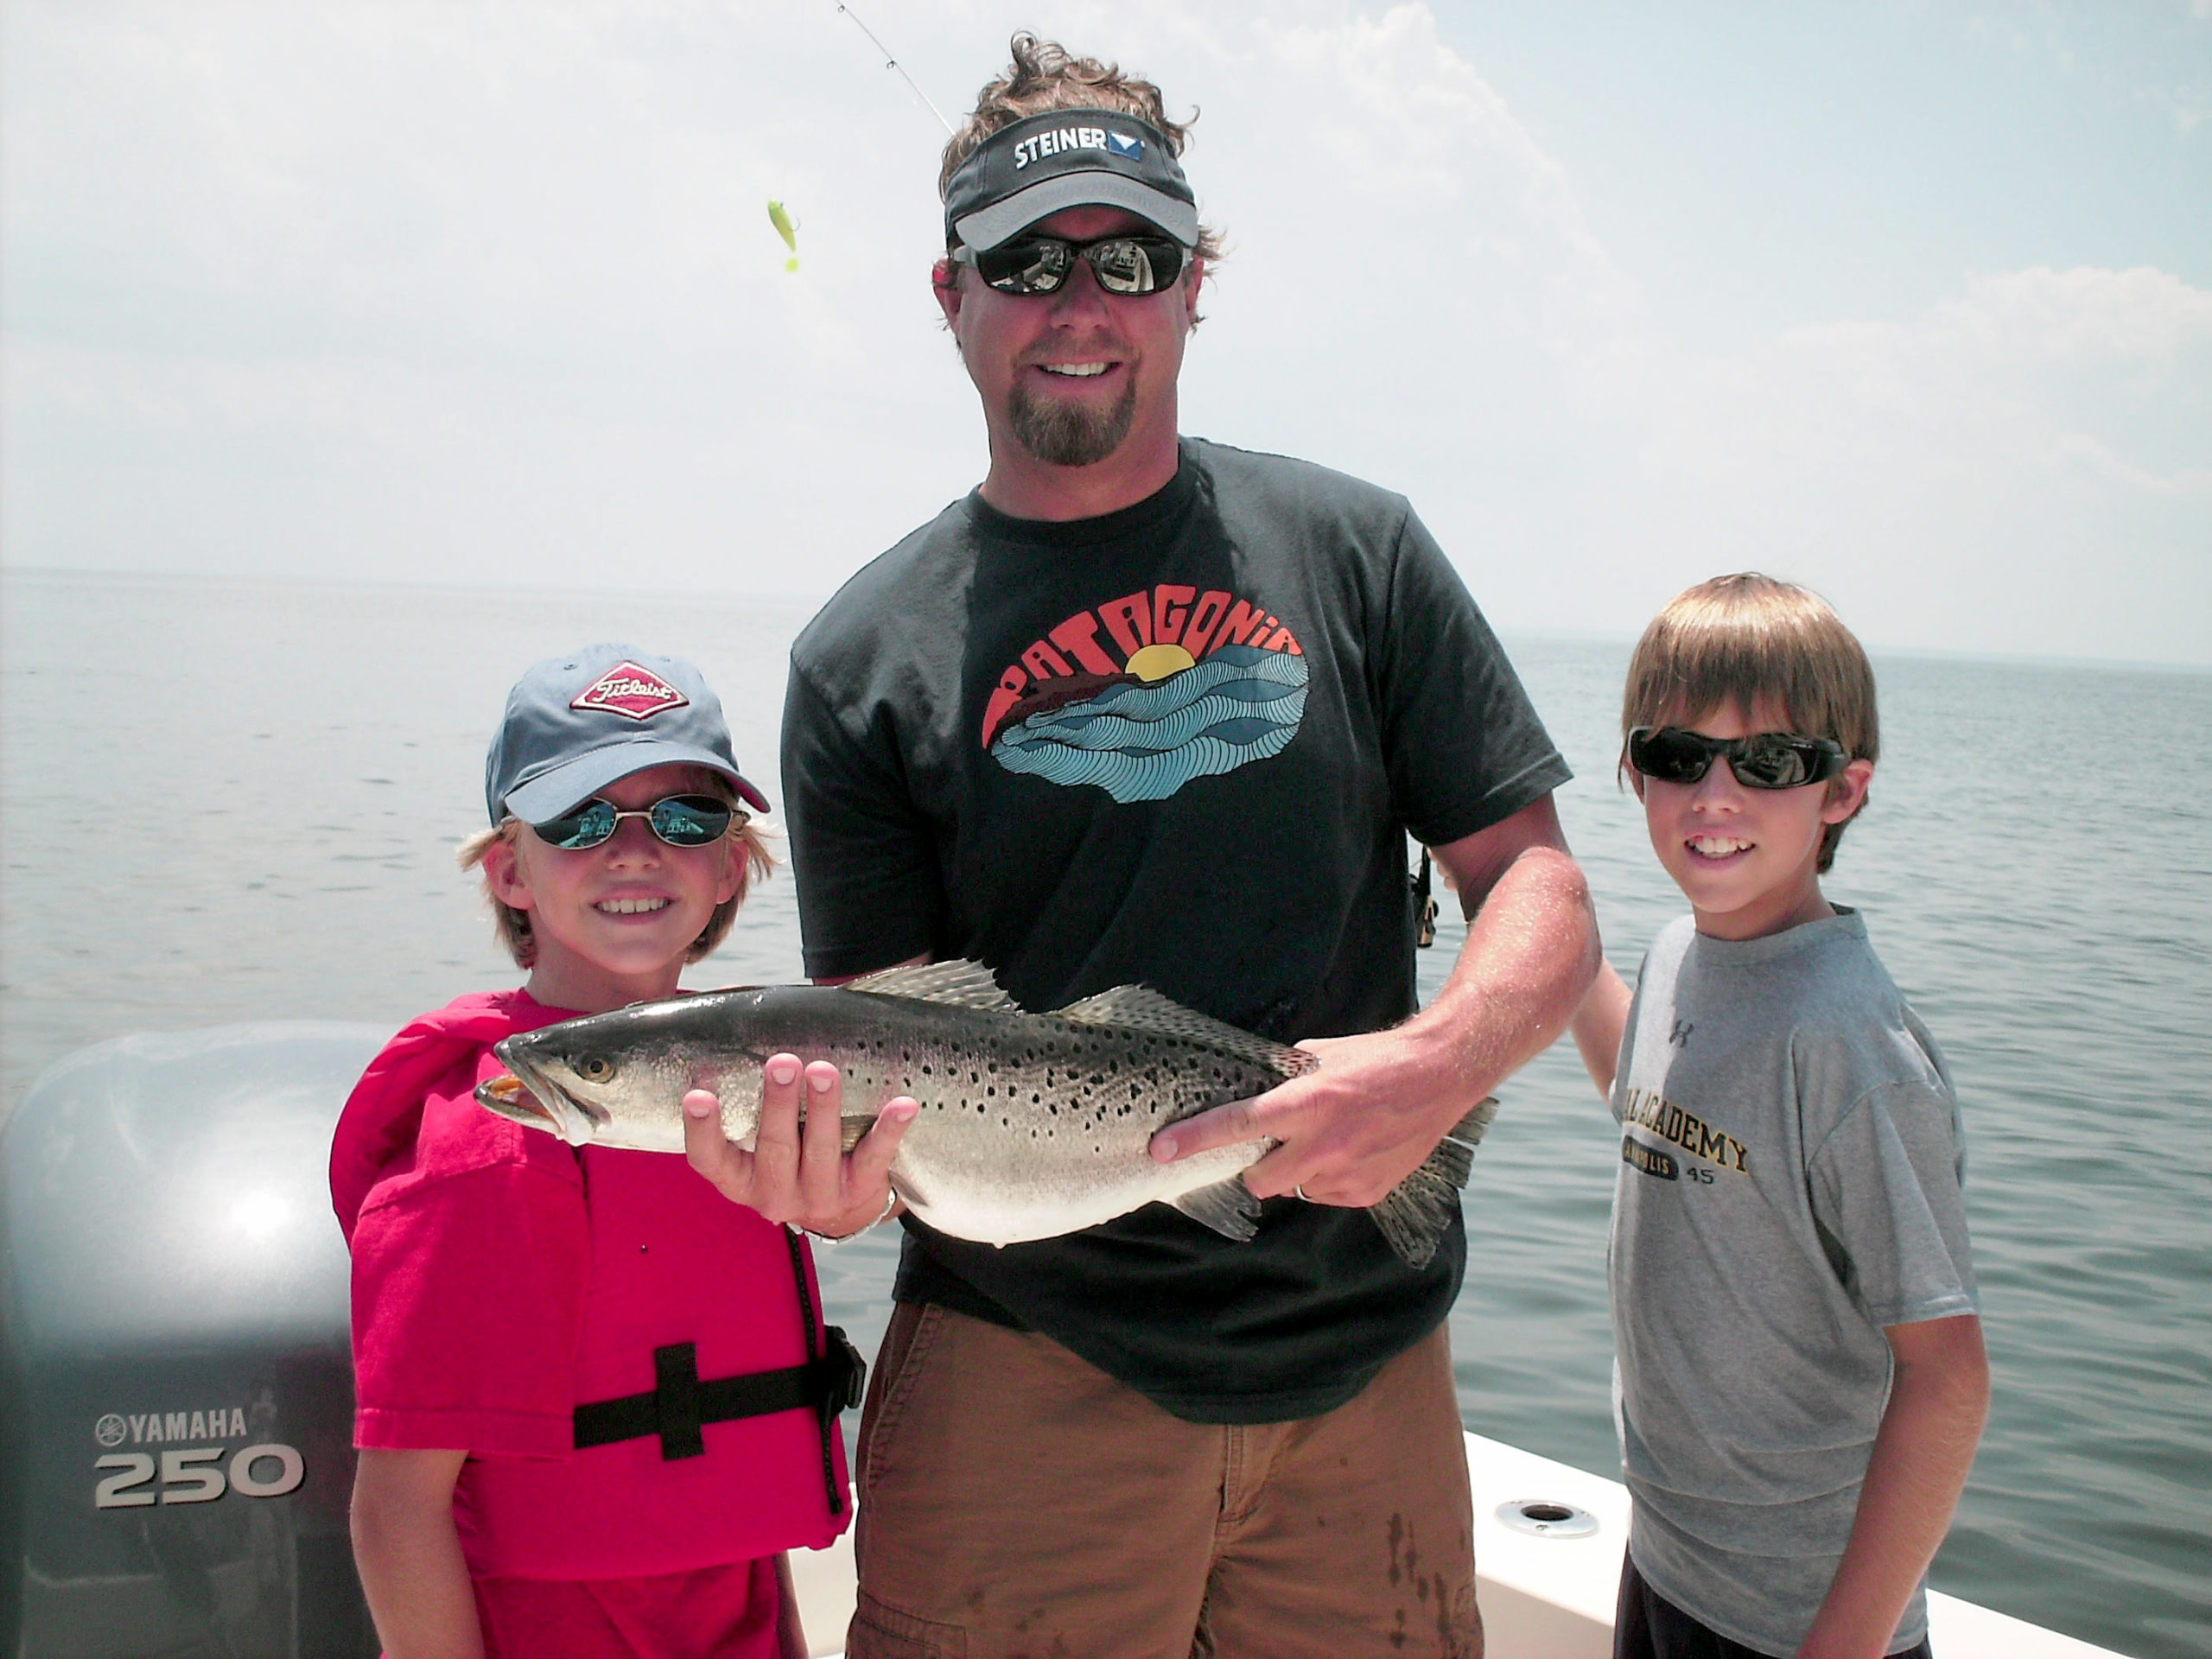 Speckled trout fishing still spotty, anglers catching reds